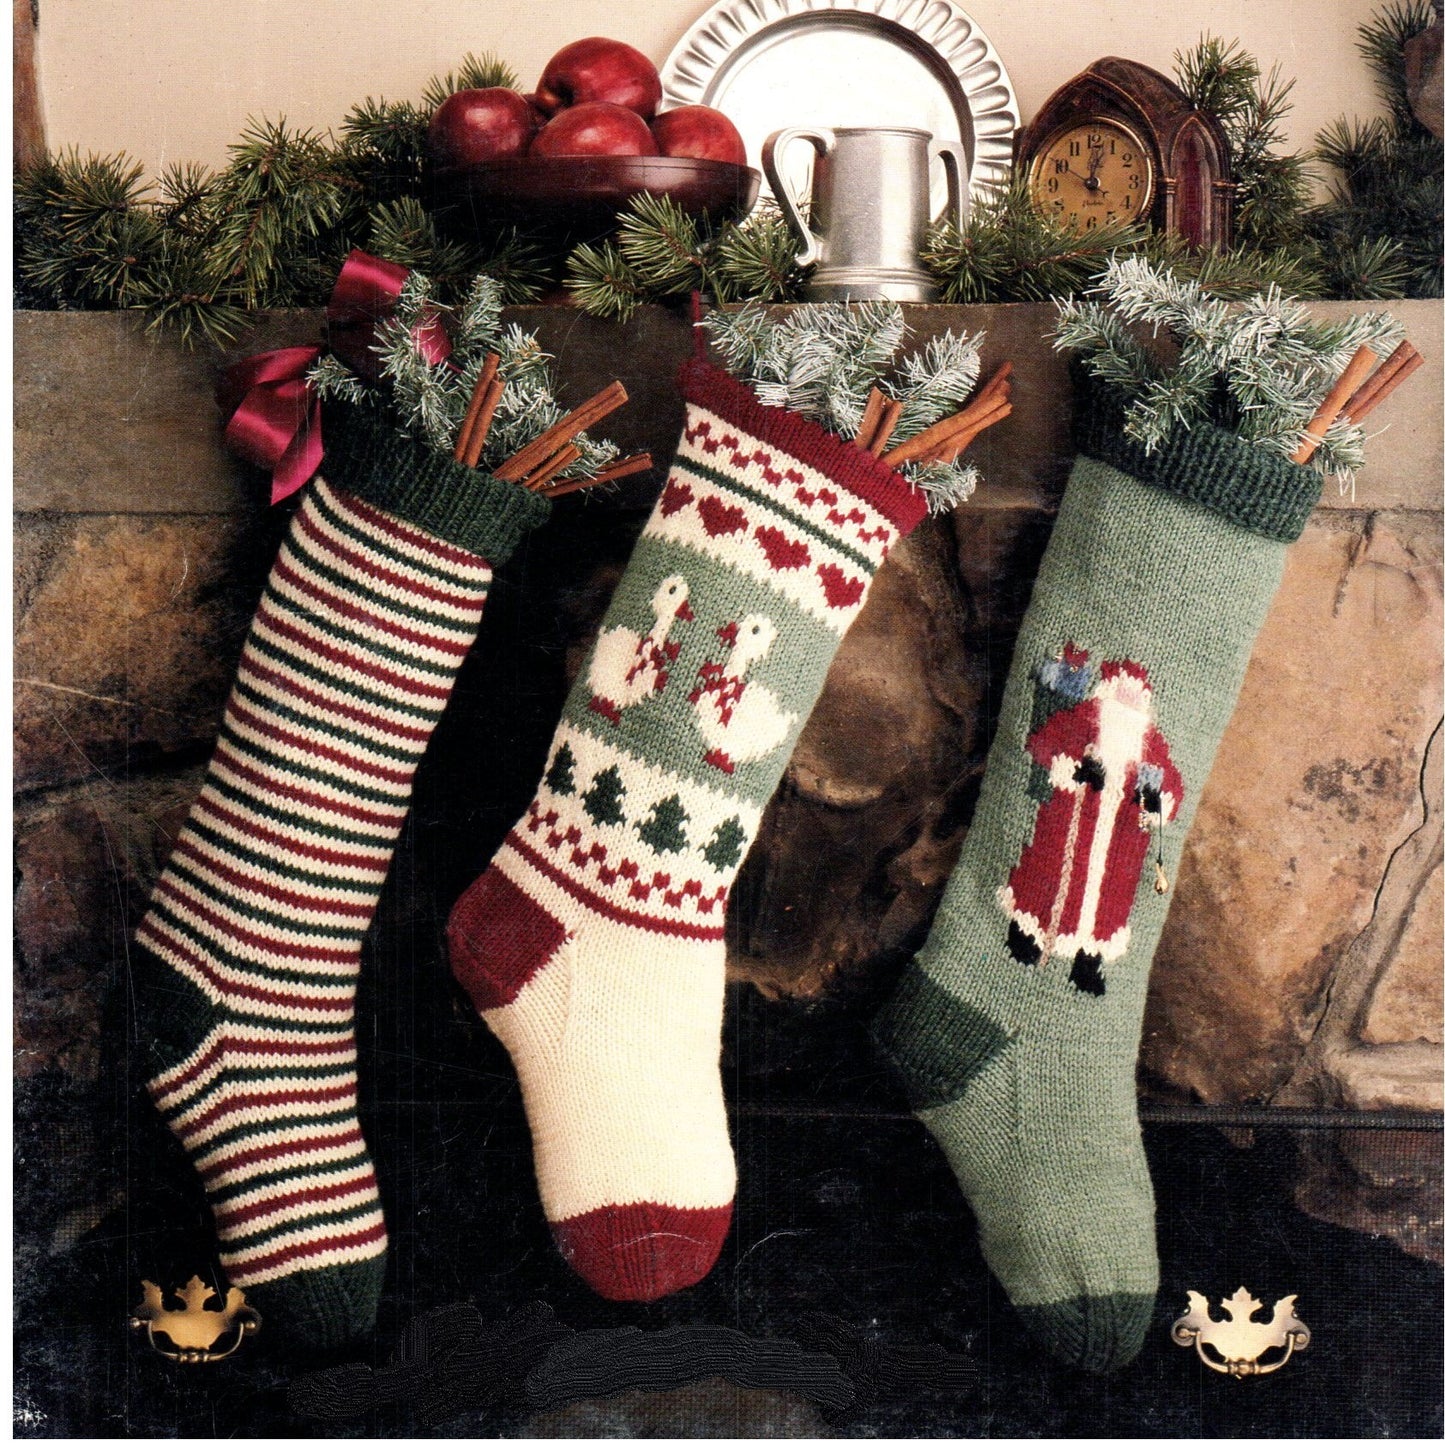 Vintage Knit Vintage Knit Christmas Stocking Pattern Santa Claus Geese Striped Knitted PDF Pattern - At Grandma's Table